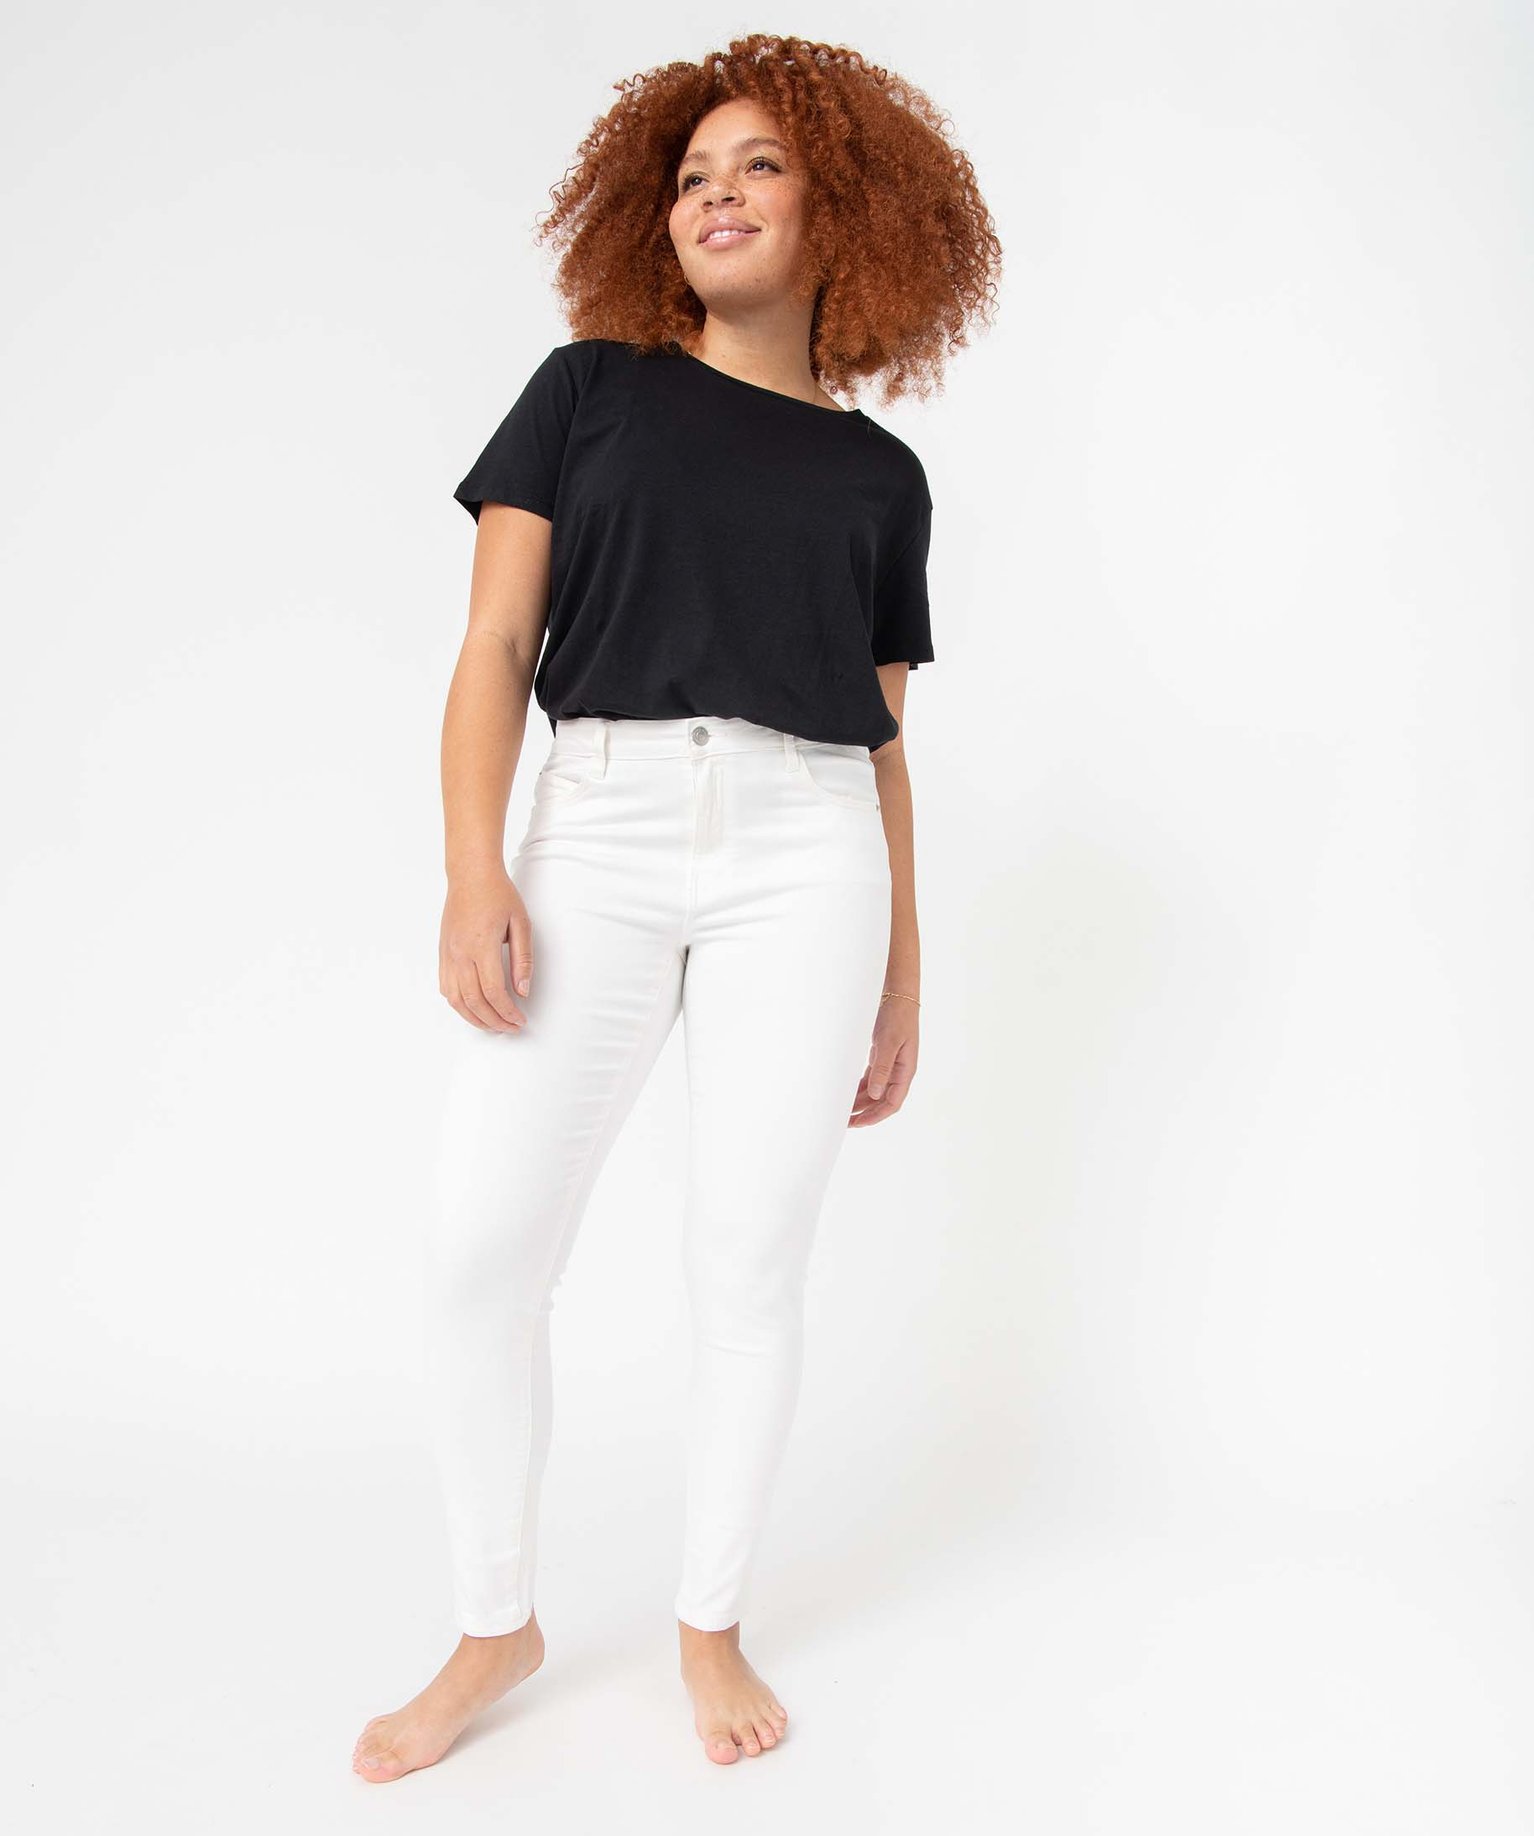 jean femme coupe skinny taille normale blanc pantalons